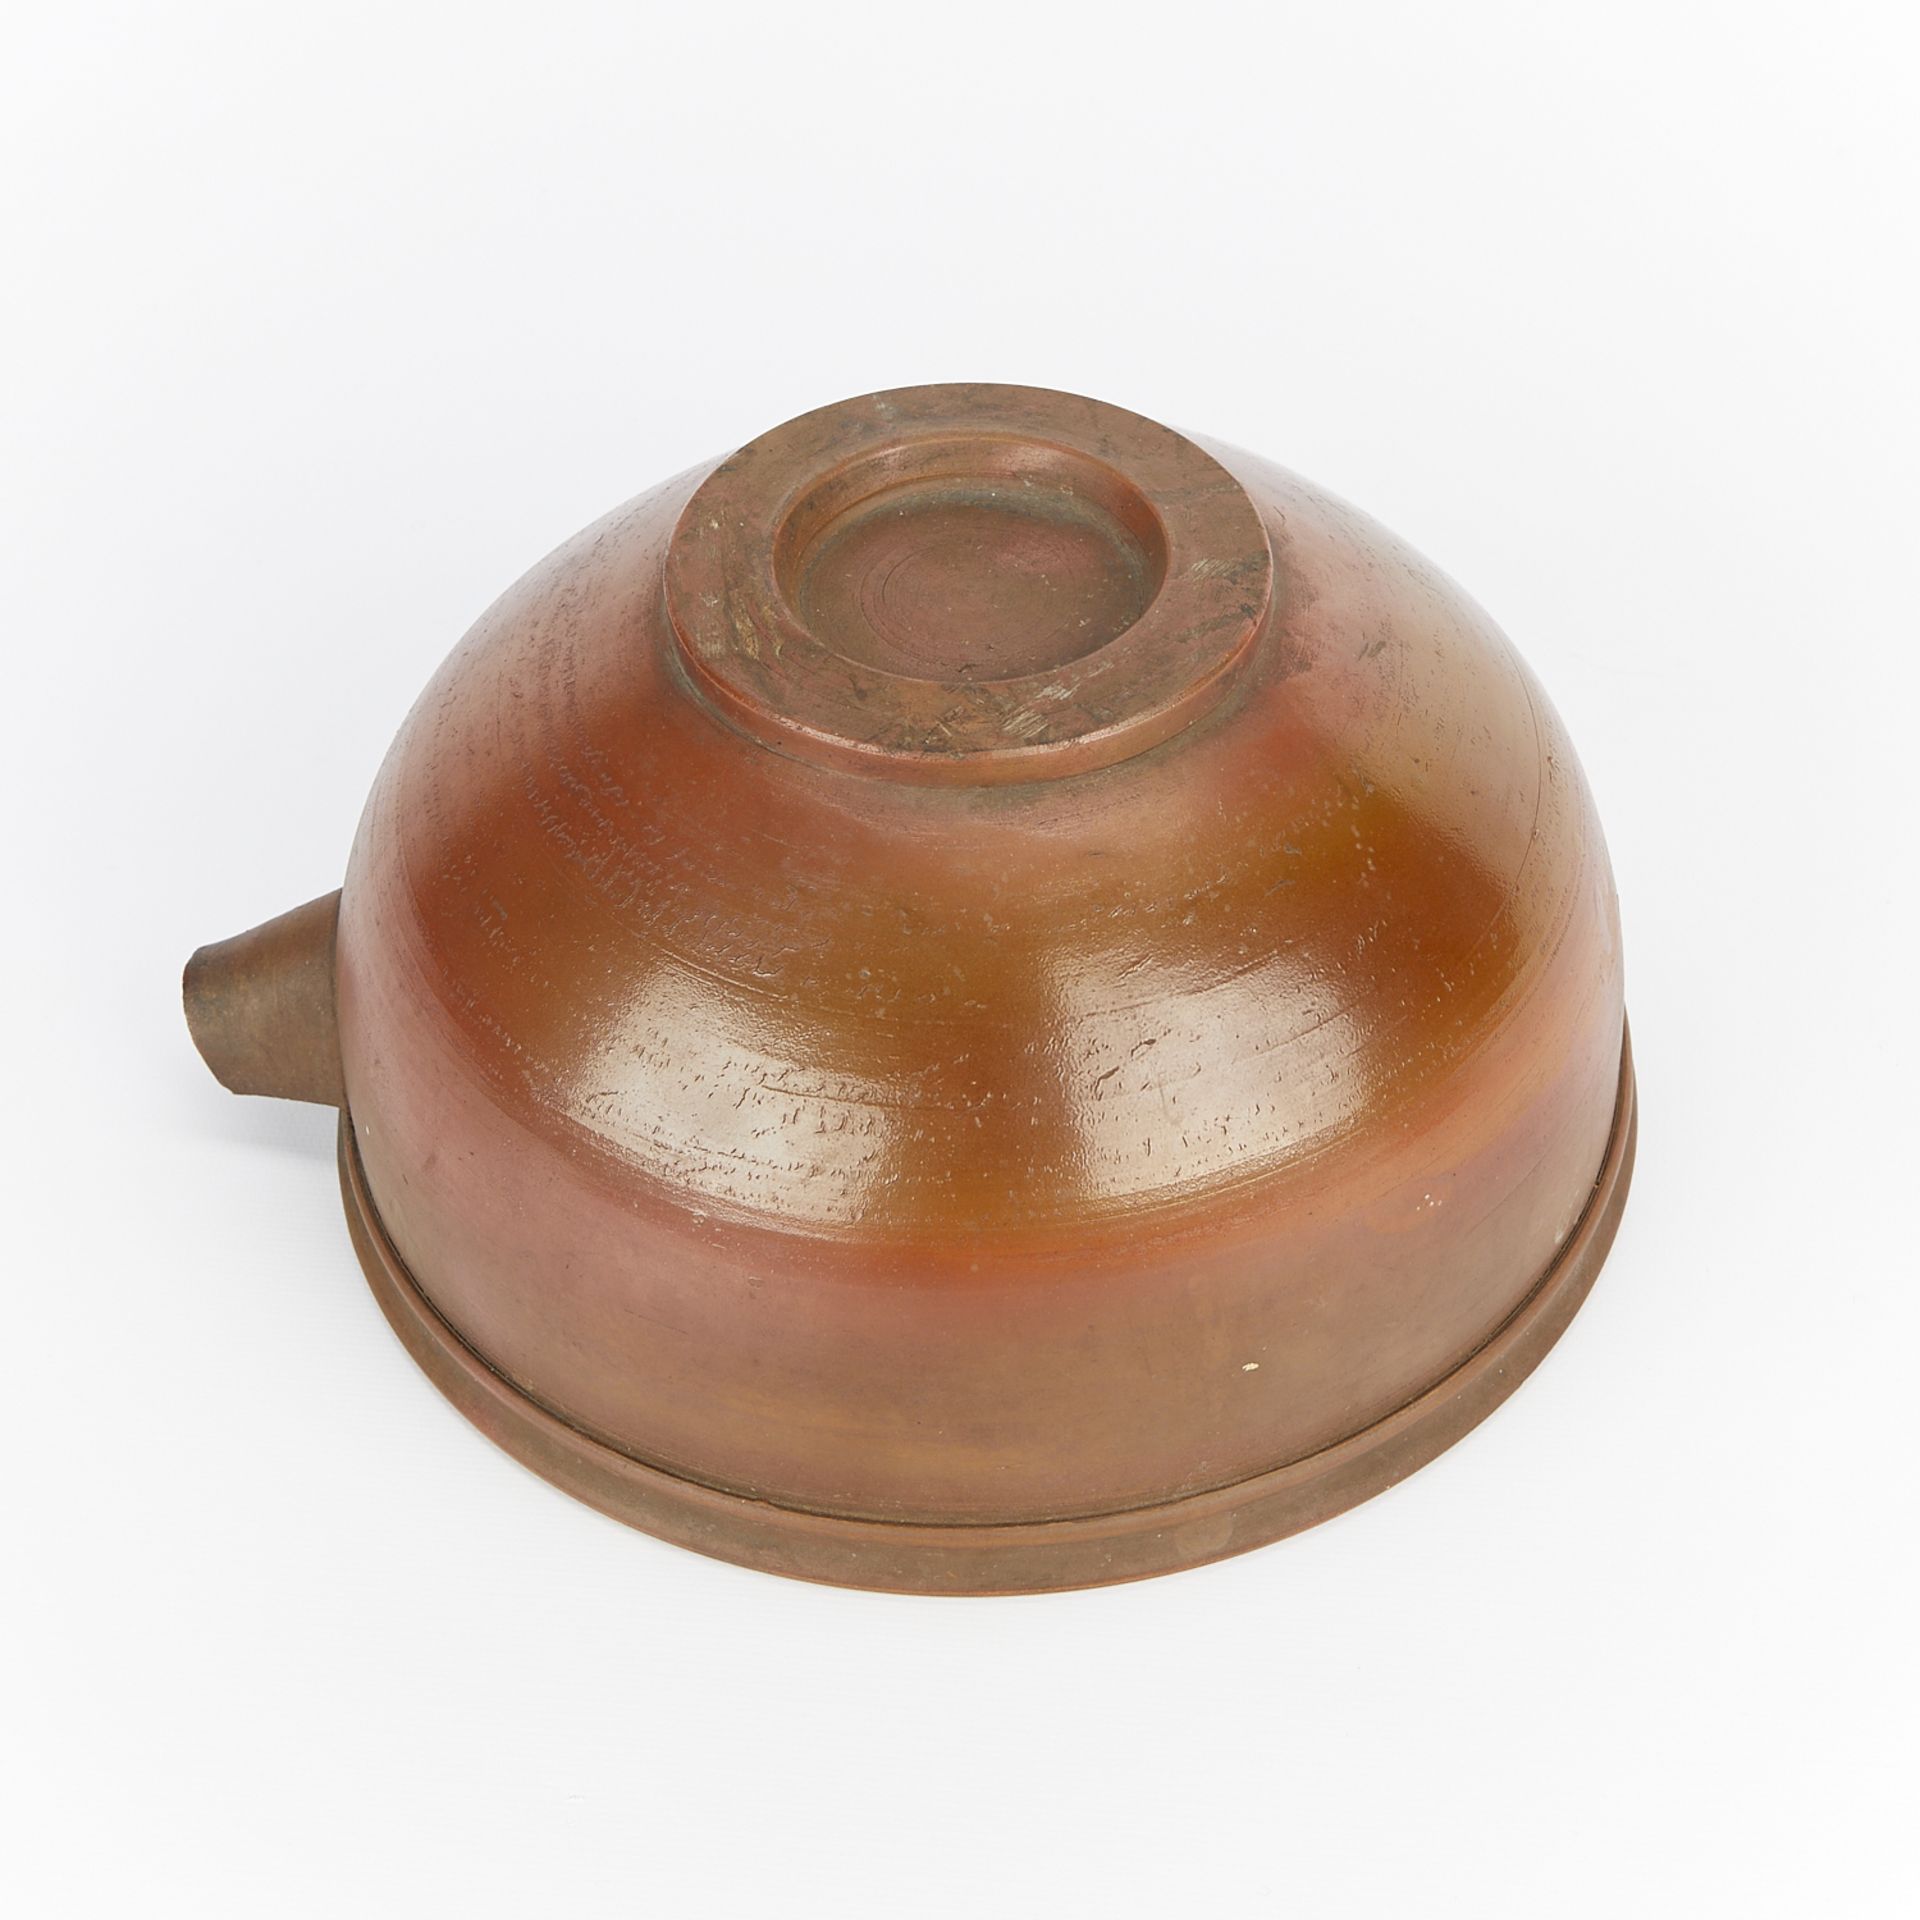 Early Japanese Mizusashi Water Jar with Spout - Image 12 of 14